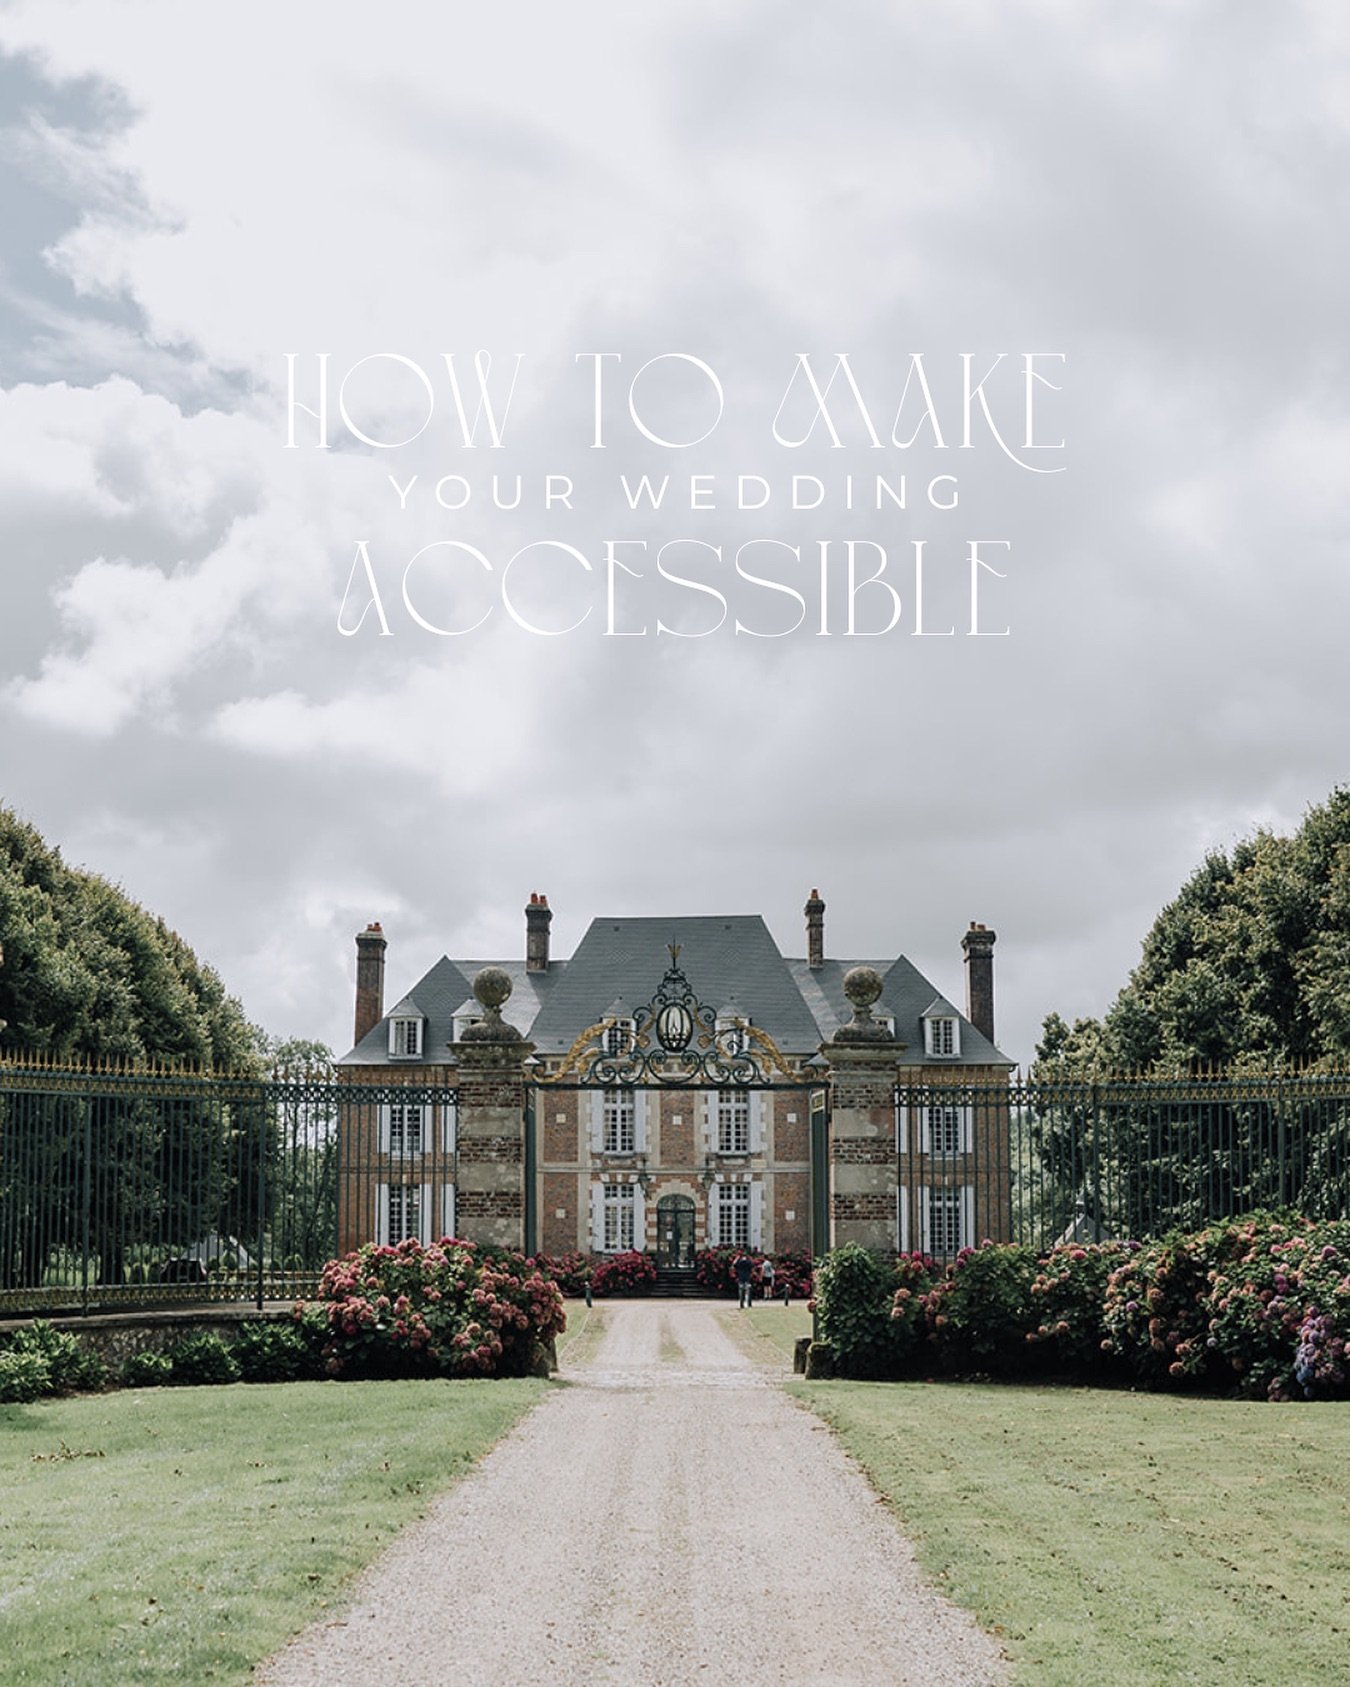 Today is Global Accessibility Awareness Day, and we want to show you how to ensure your wedding is accessible in all possible ways 🤍

Creating an inclusive and memorable experience for all your guests is key. From addressing physical mobility issues